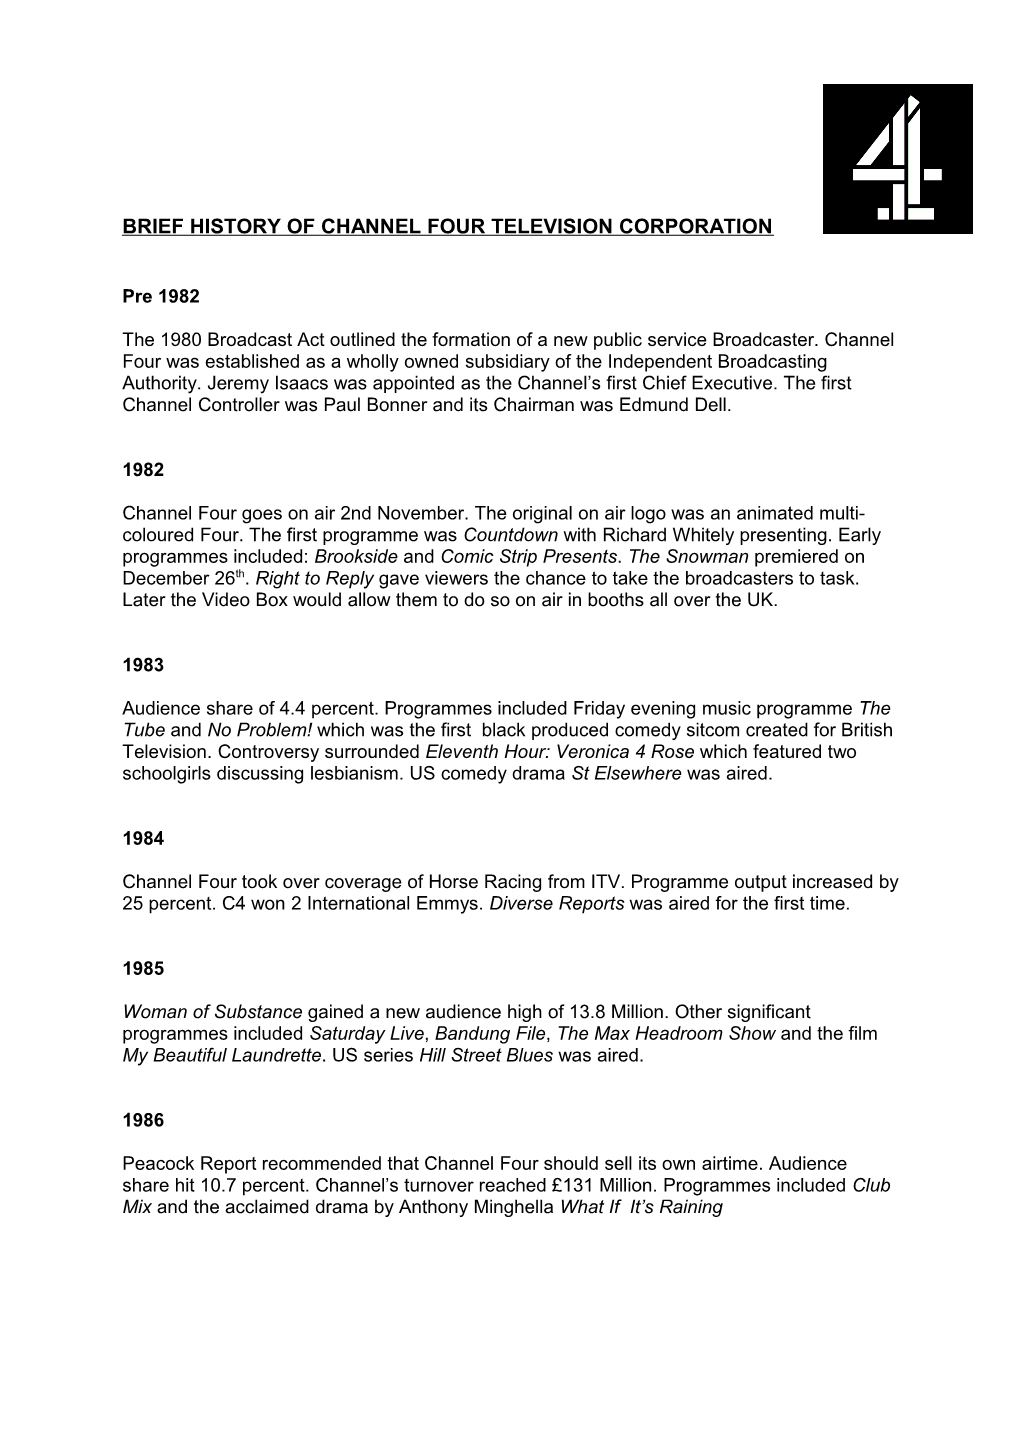 Brief History of Channel Four Television Corporation